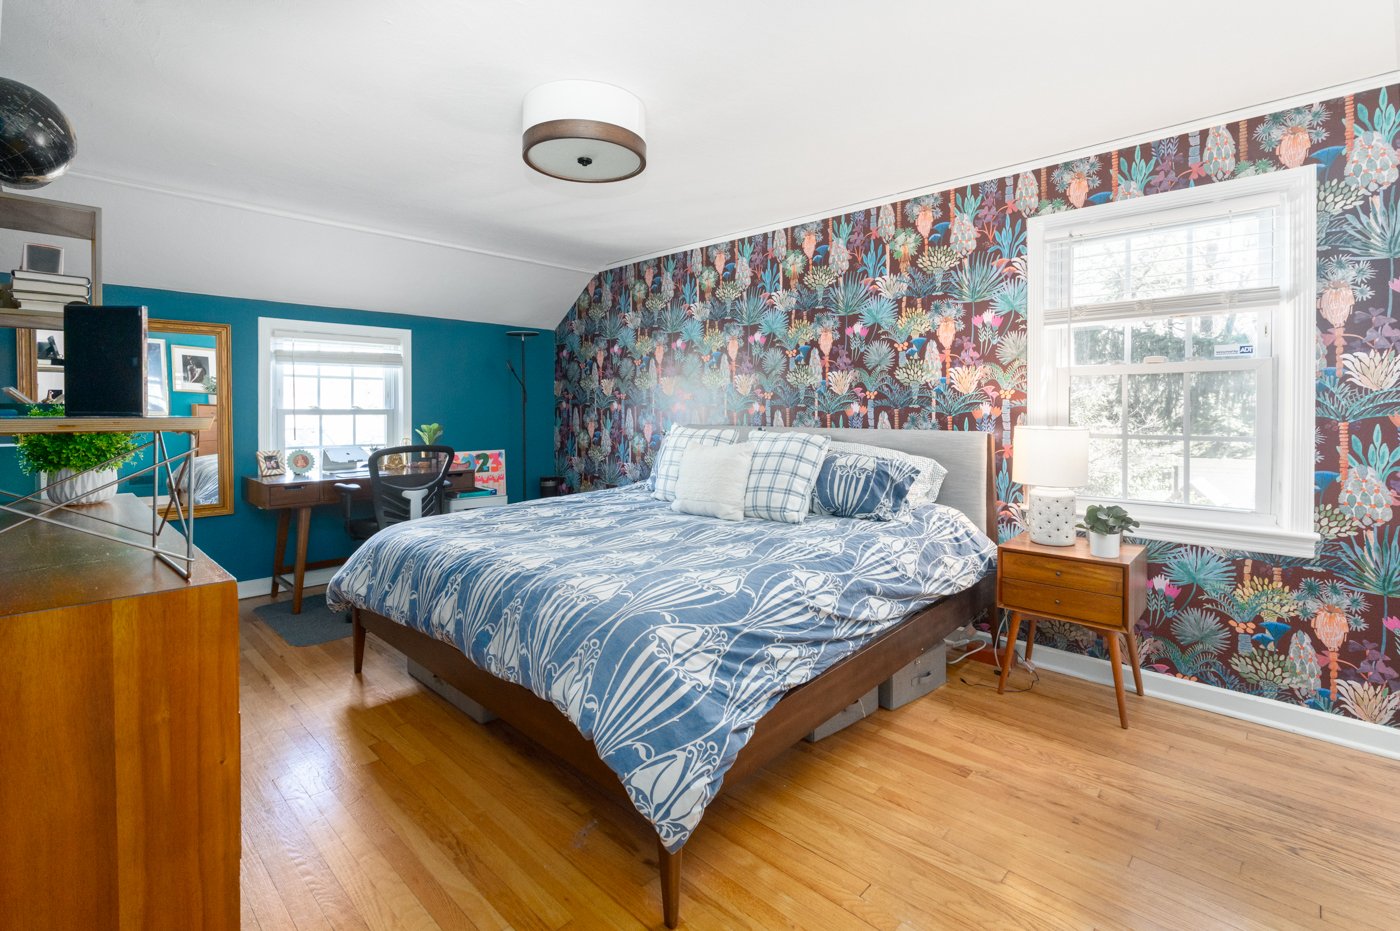 PRIMARY BED 566 Prospect real estate (Low res)-1.jpg